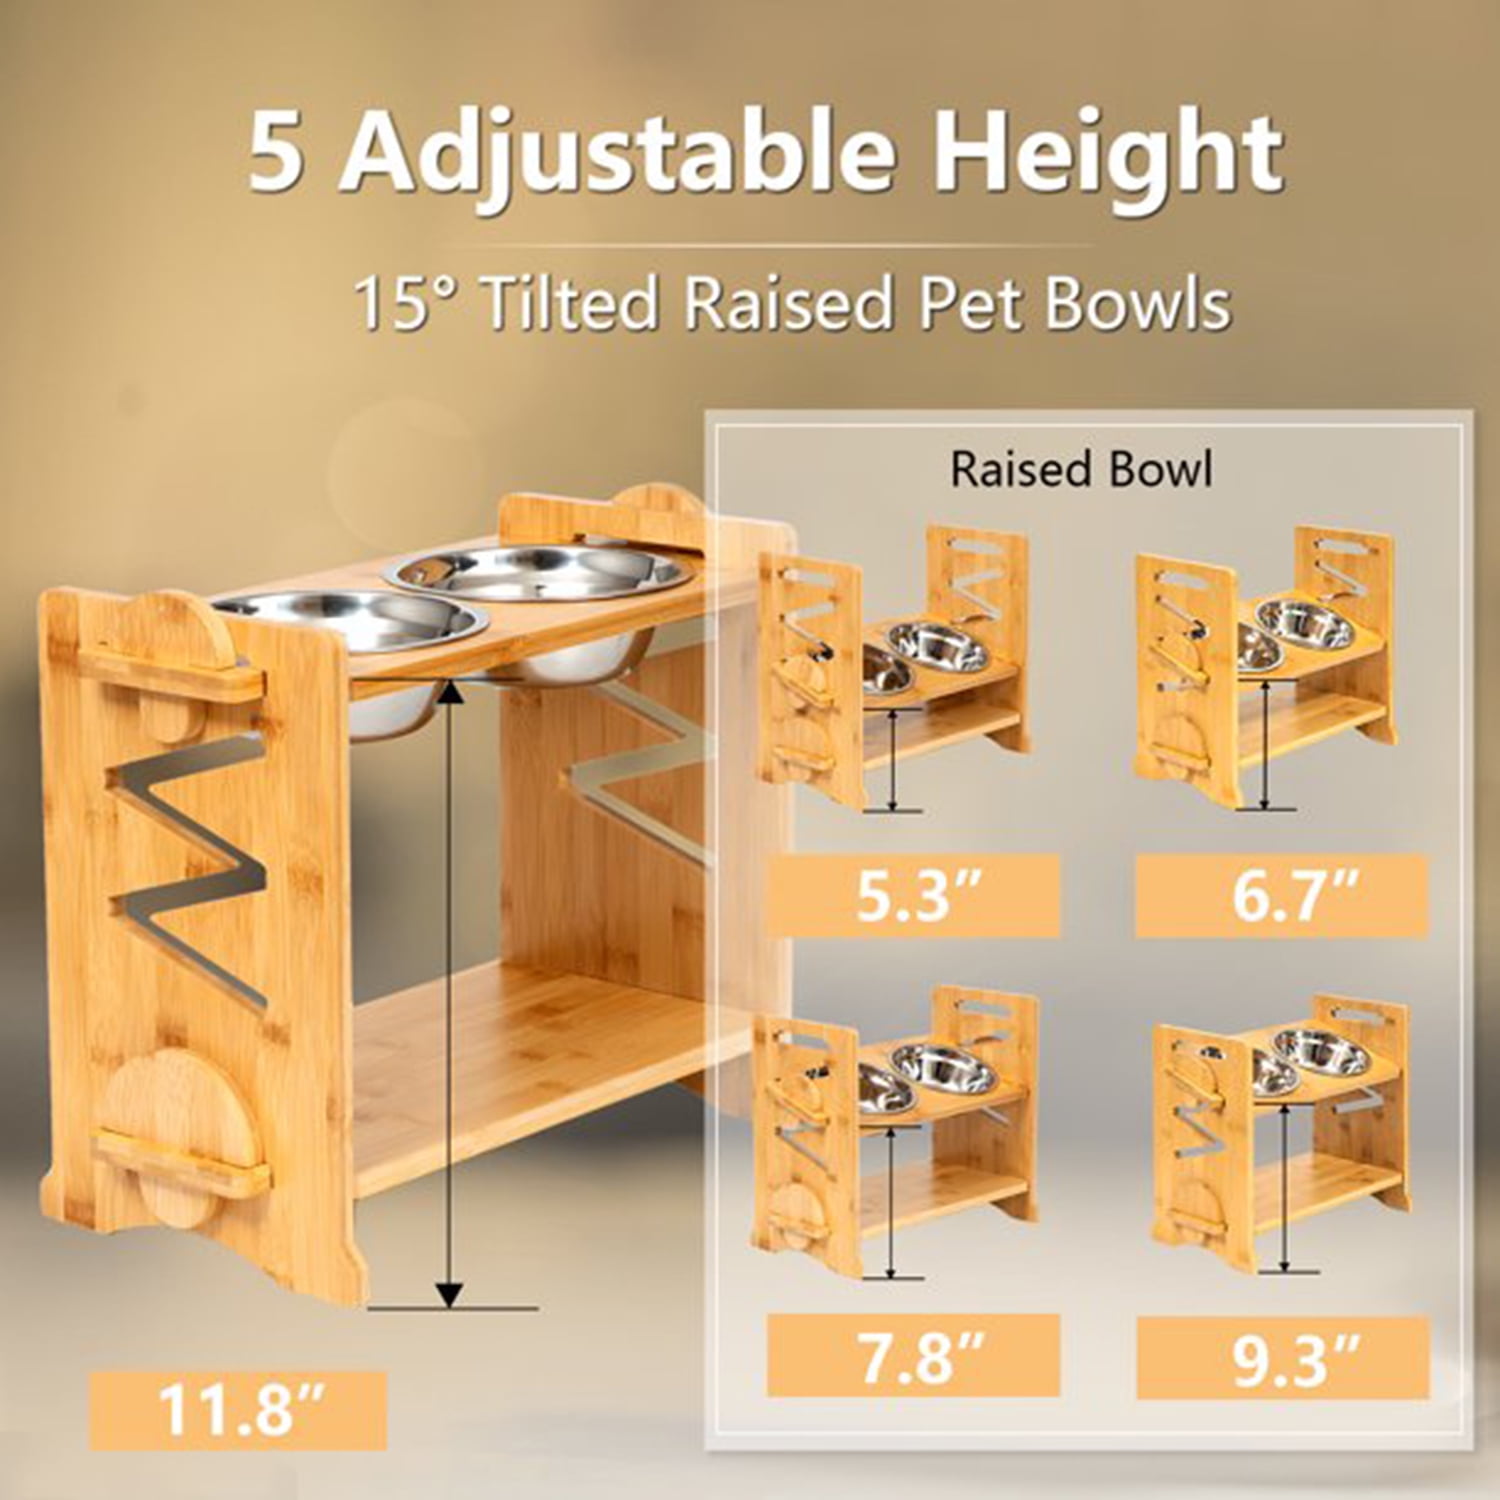 ZPirates Dog Water Bowl Dispenser Stand - Adjustable Width, Holds Pet Food and Water Dispensers - Bamboo Stand Only